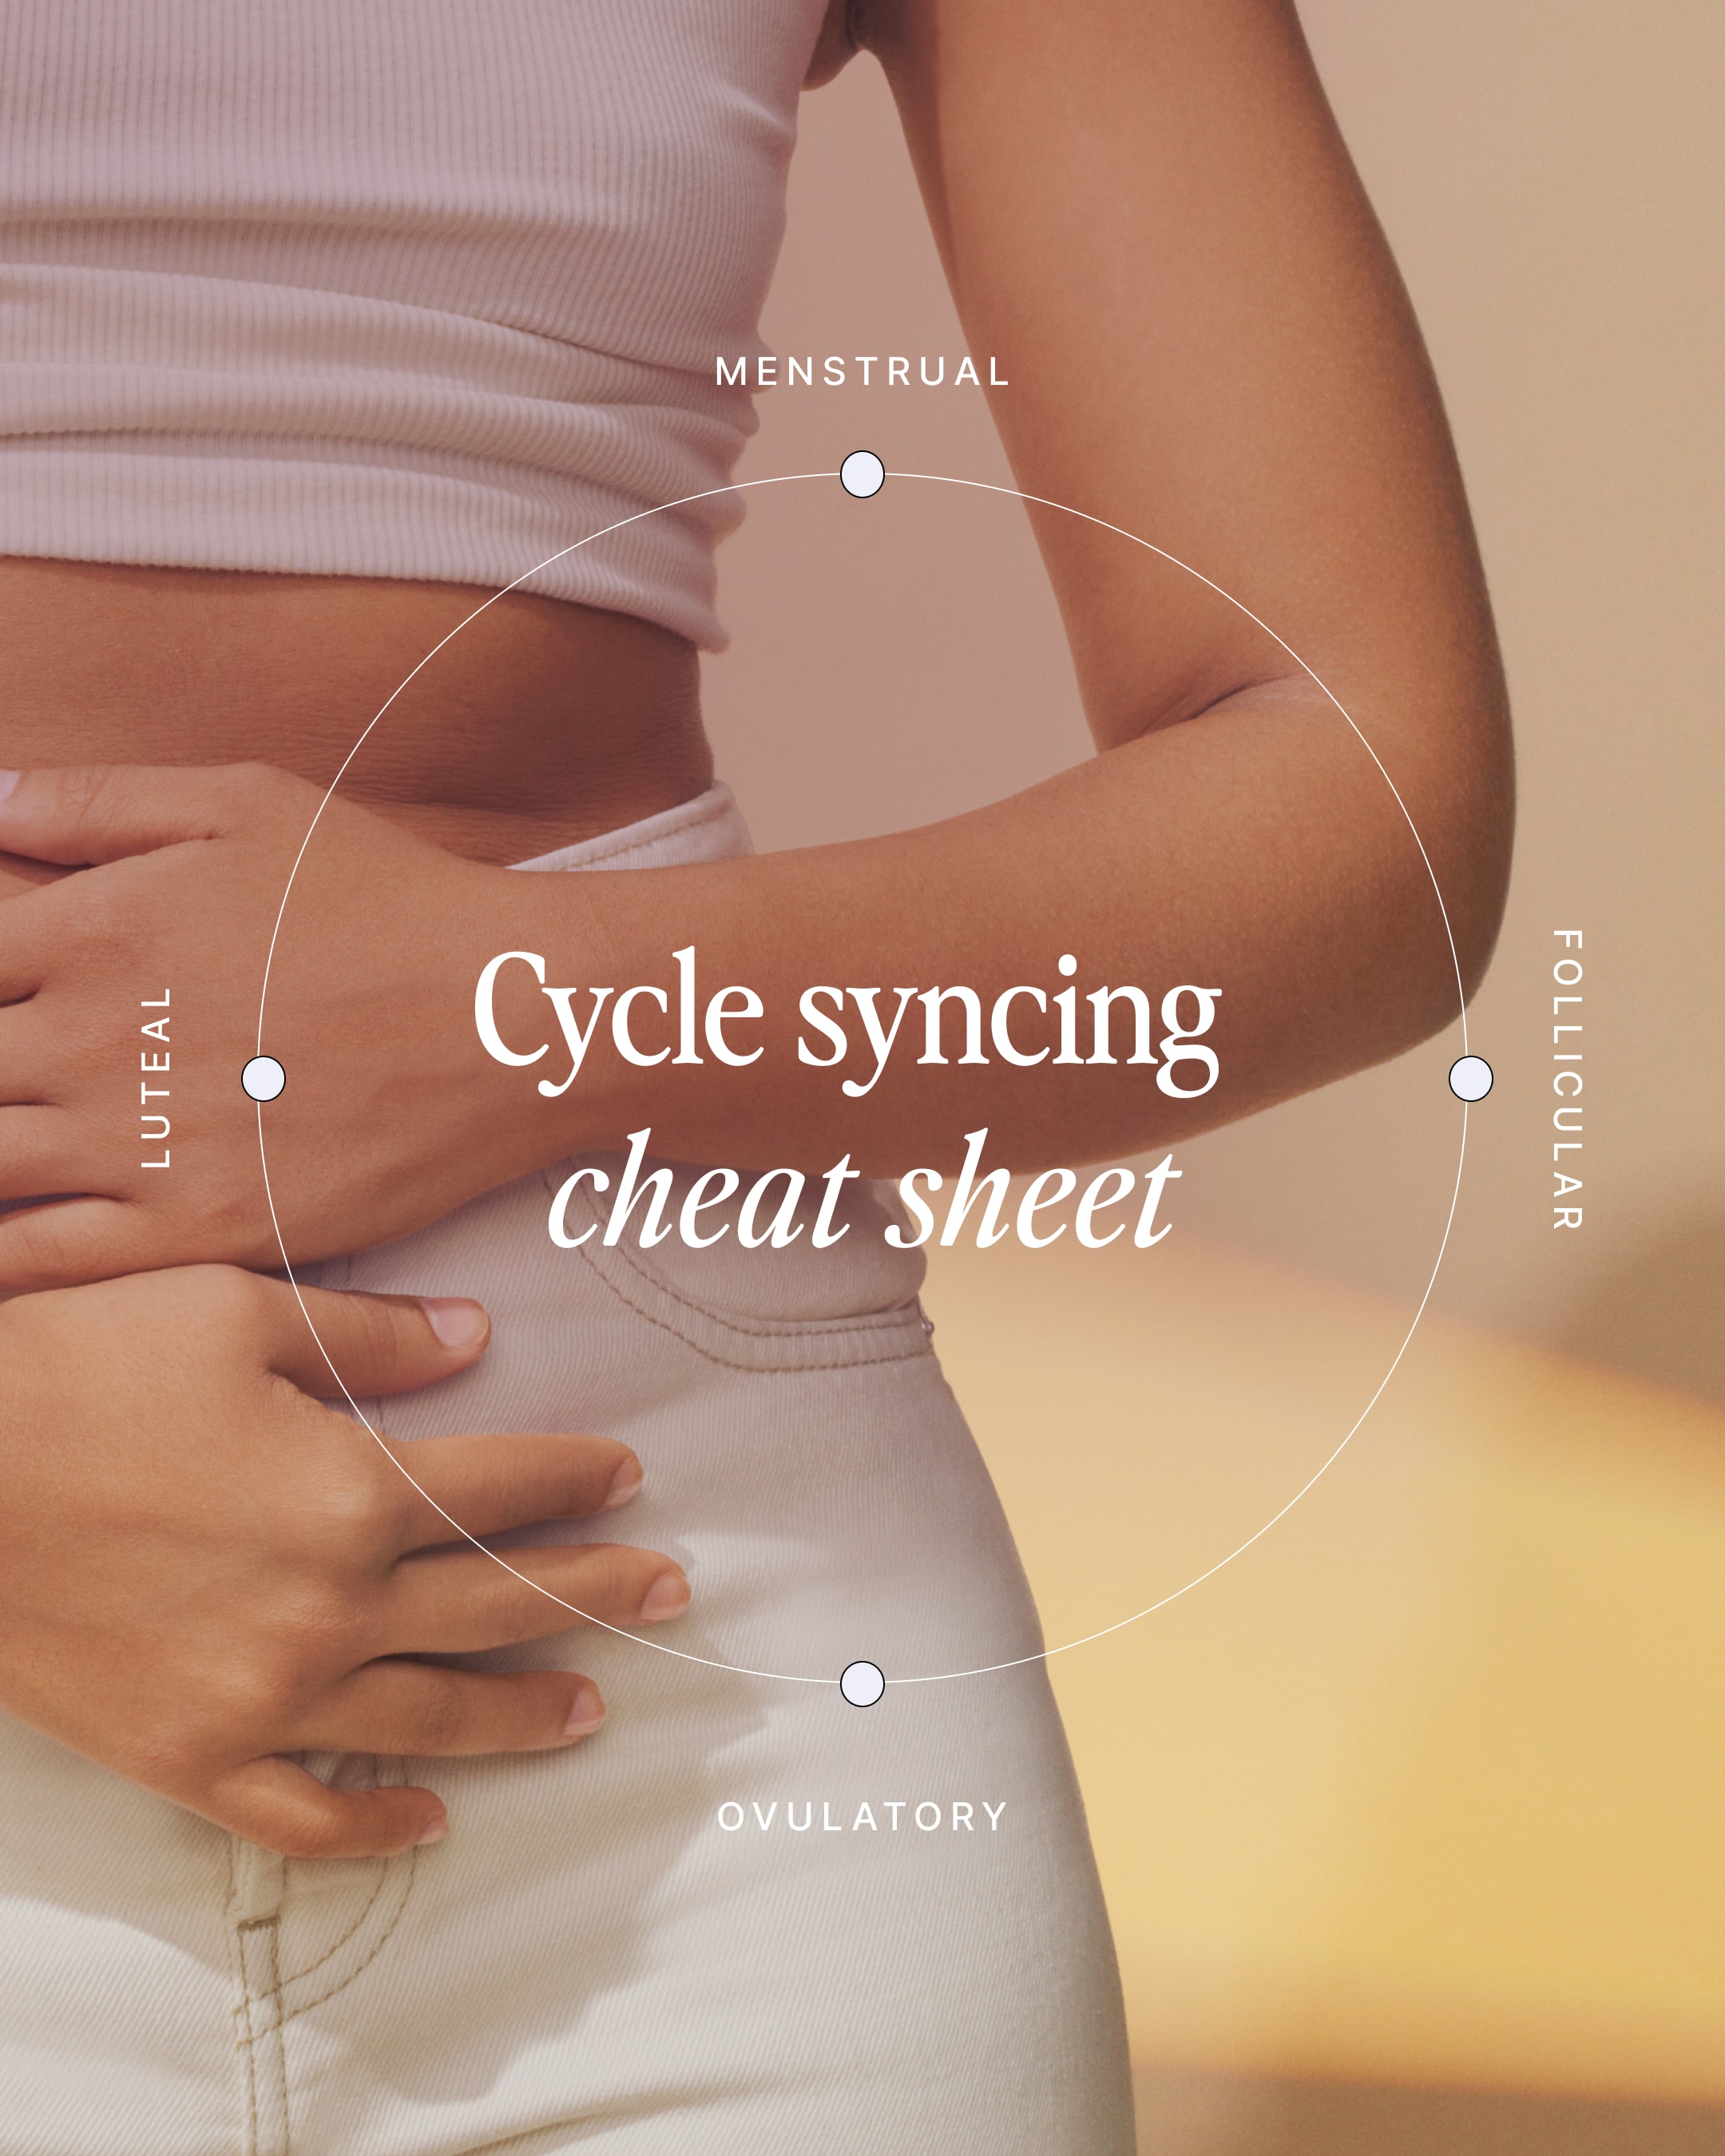 A guide to cycle syncing: Luteal phase 🌸